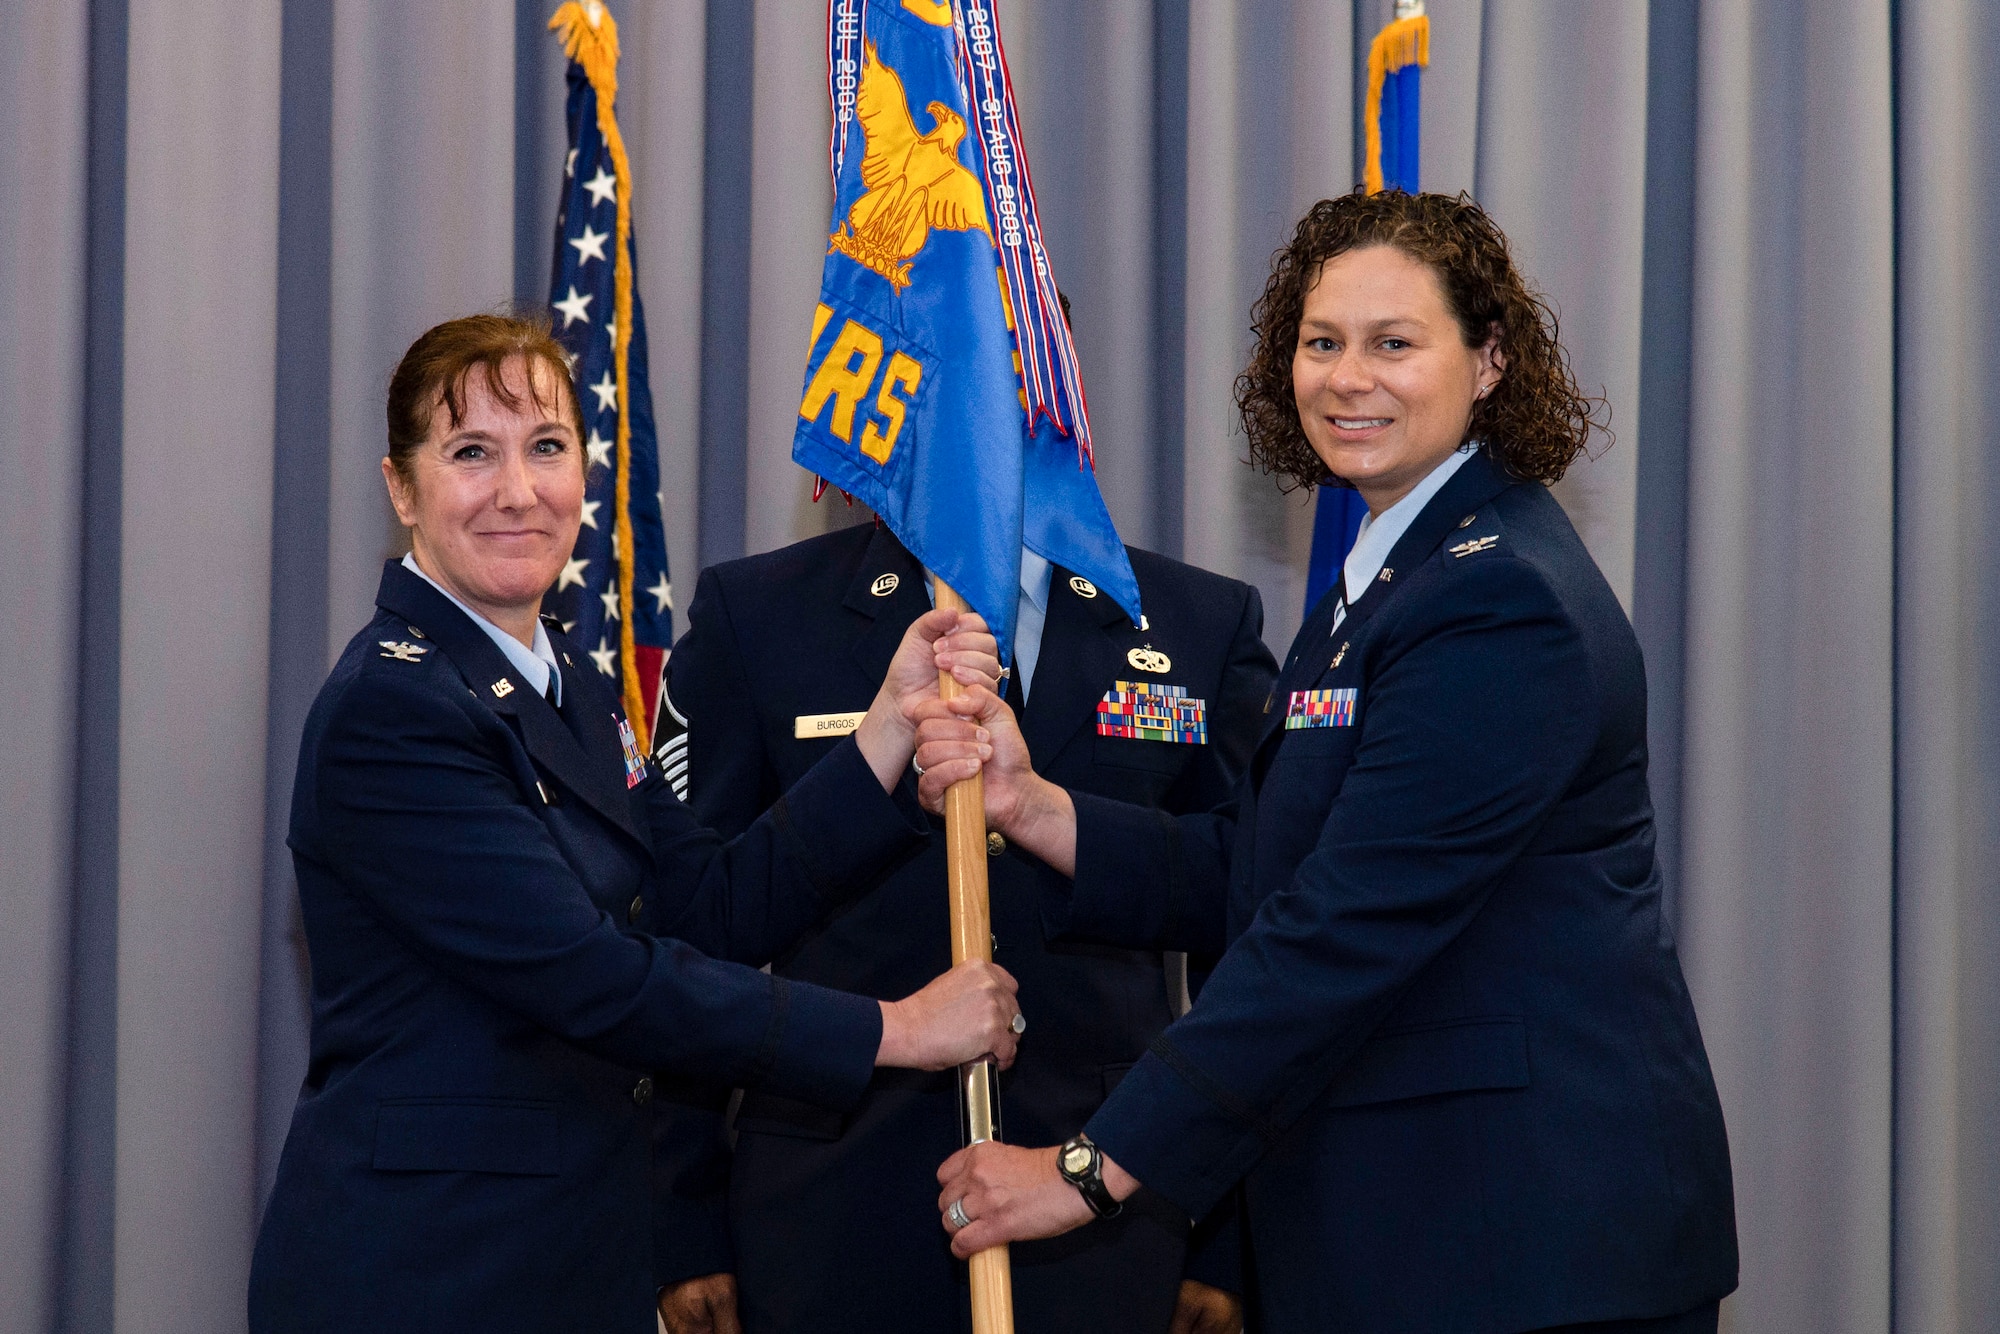 Lt. Col. Kristen Nichols, 436th Operational Medical Readiness Squadron, right, relinquishes command of the 436th OMRS after handing the guidon to Col. Tracy Allen, left, 436th Medical Group commander, during a change of command ceremony held at The Landings on Dover Air Force Base, Delaware, June 9, 2022. The 436th OMRS Change of Command was the third of four ceremonies conducted within the 436th MDG. Guidon bearer for the ceremony was Master Sgt. Andrew Burgos, center, 436th OMRS superintendent. (U.S. Air Force photo by Roland Balik)